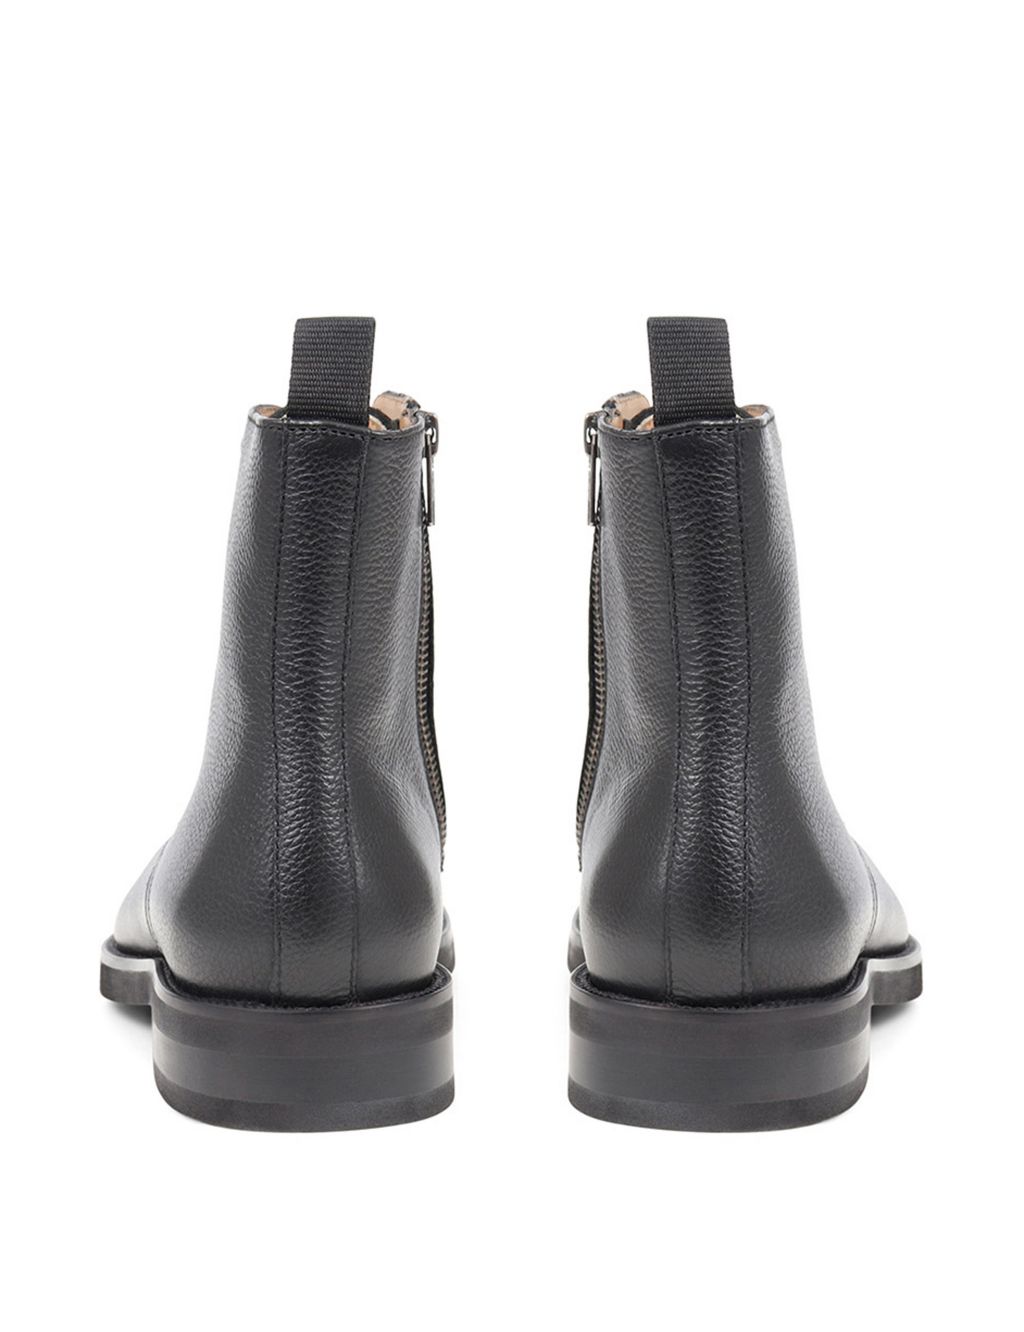 Leather Side Zip Chelsea Boots image 4